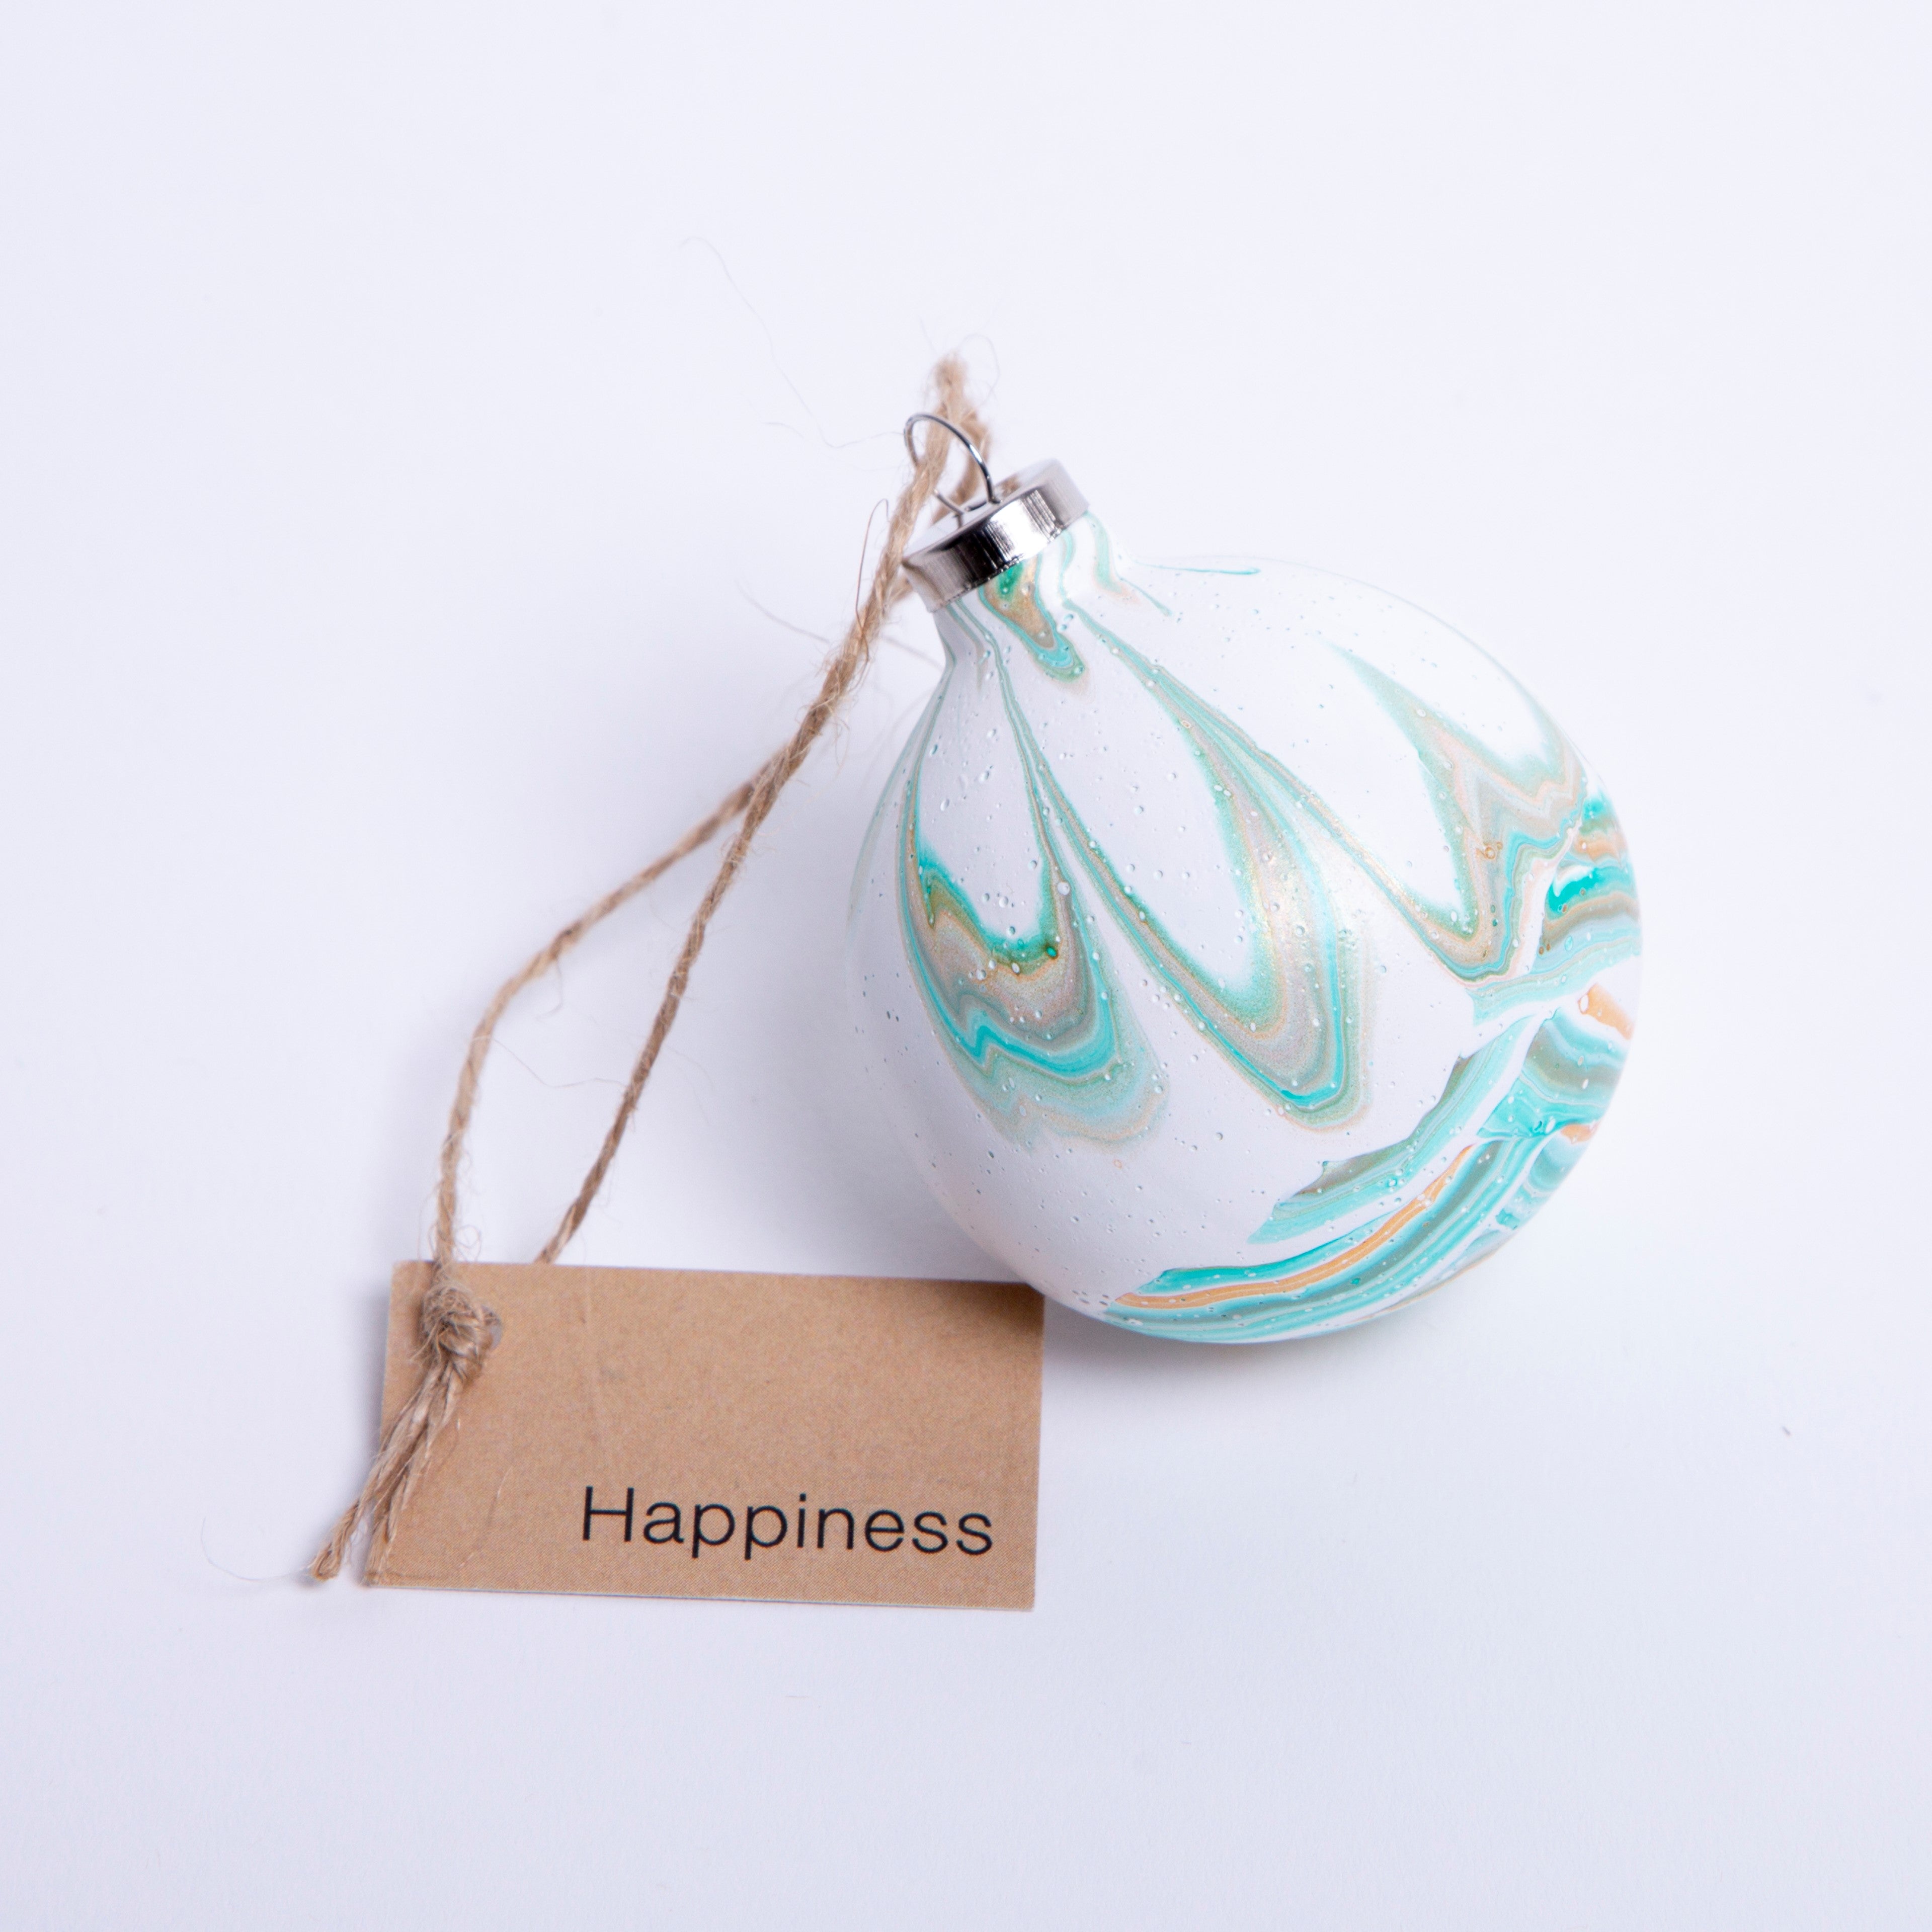 'Colour, Happiness, Family & Purity of Light' Set of 4 baubles - Round shape